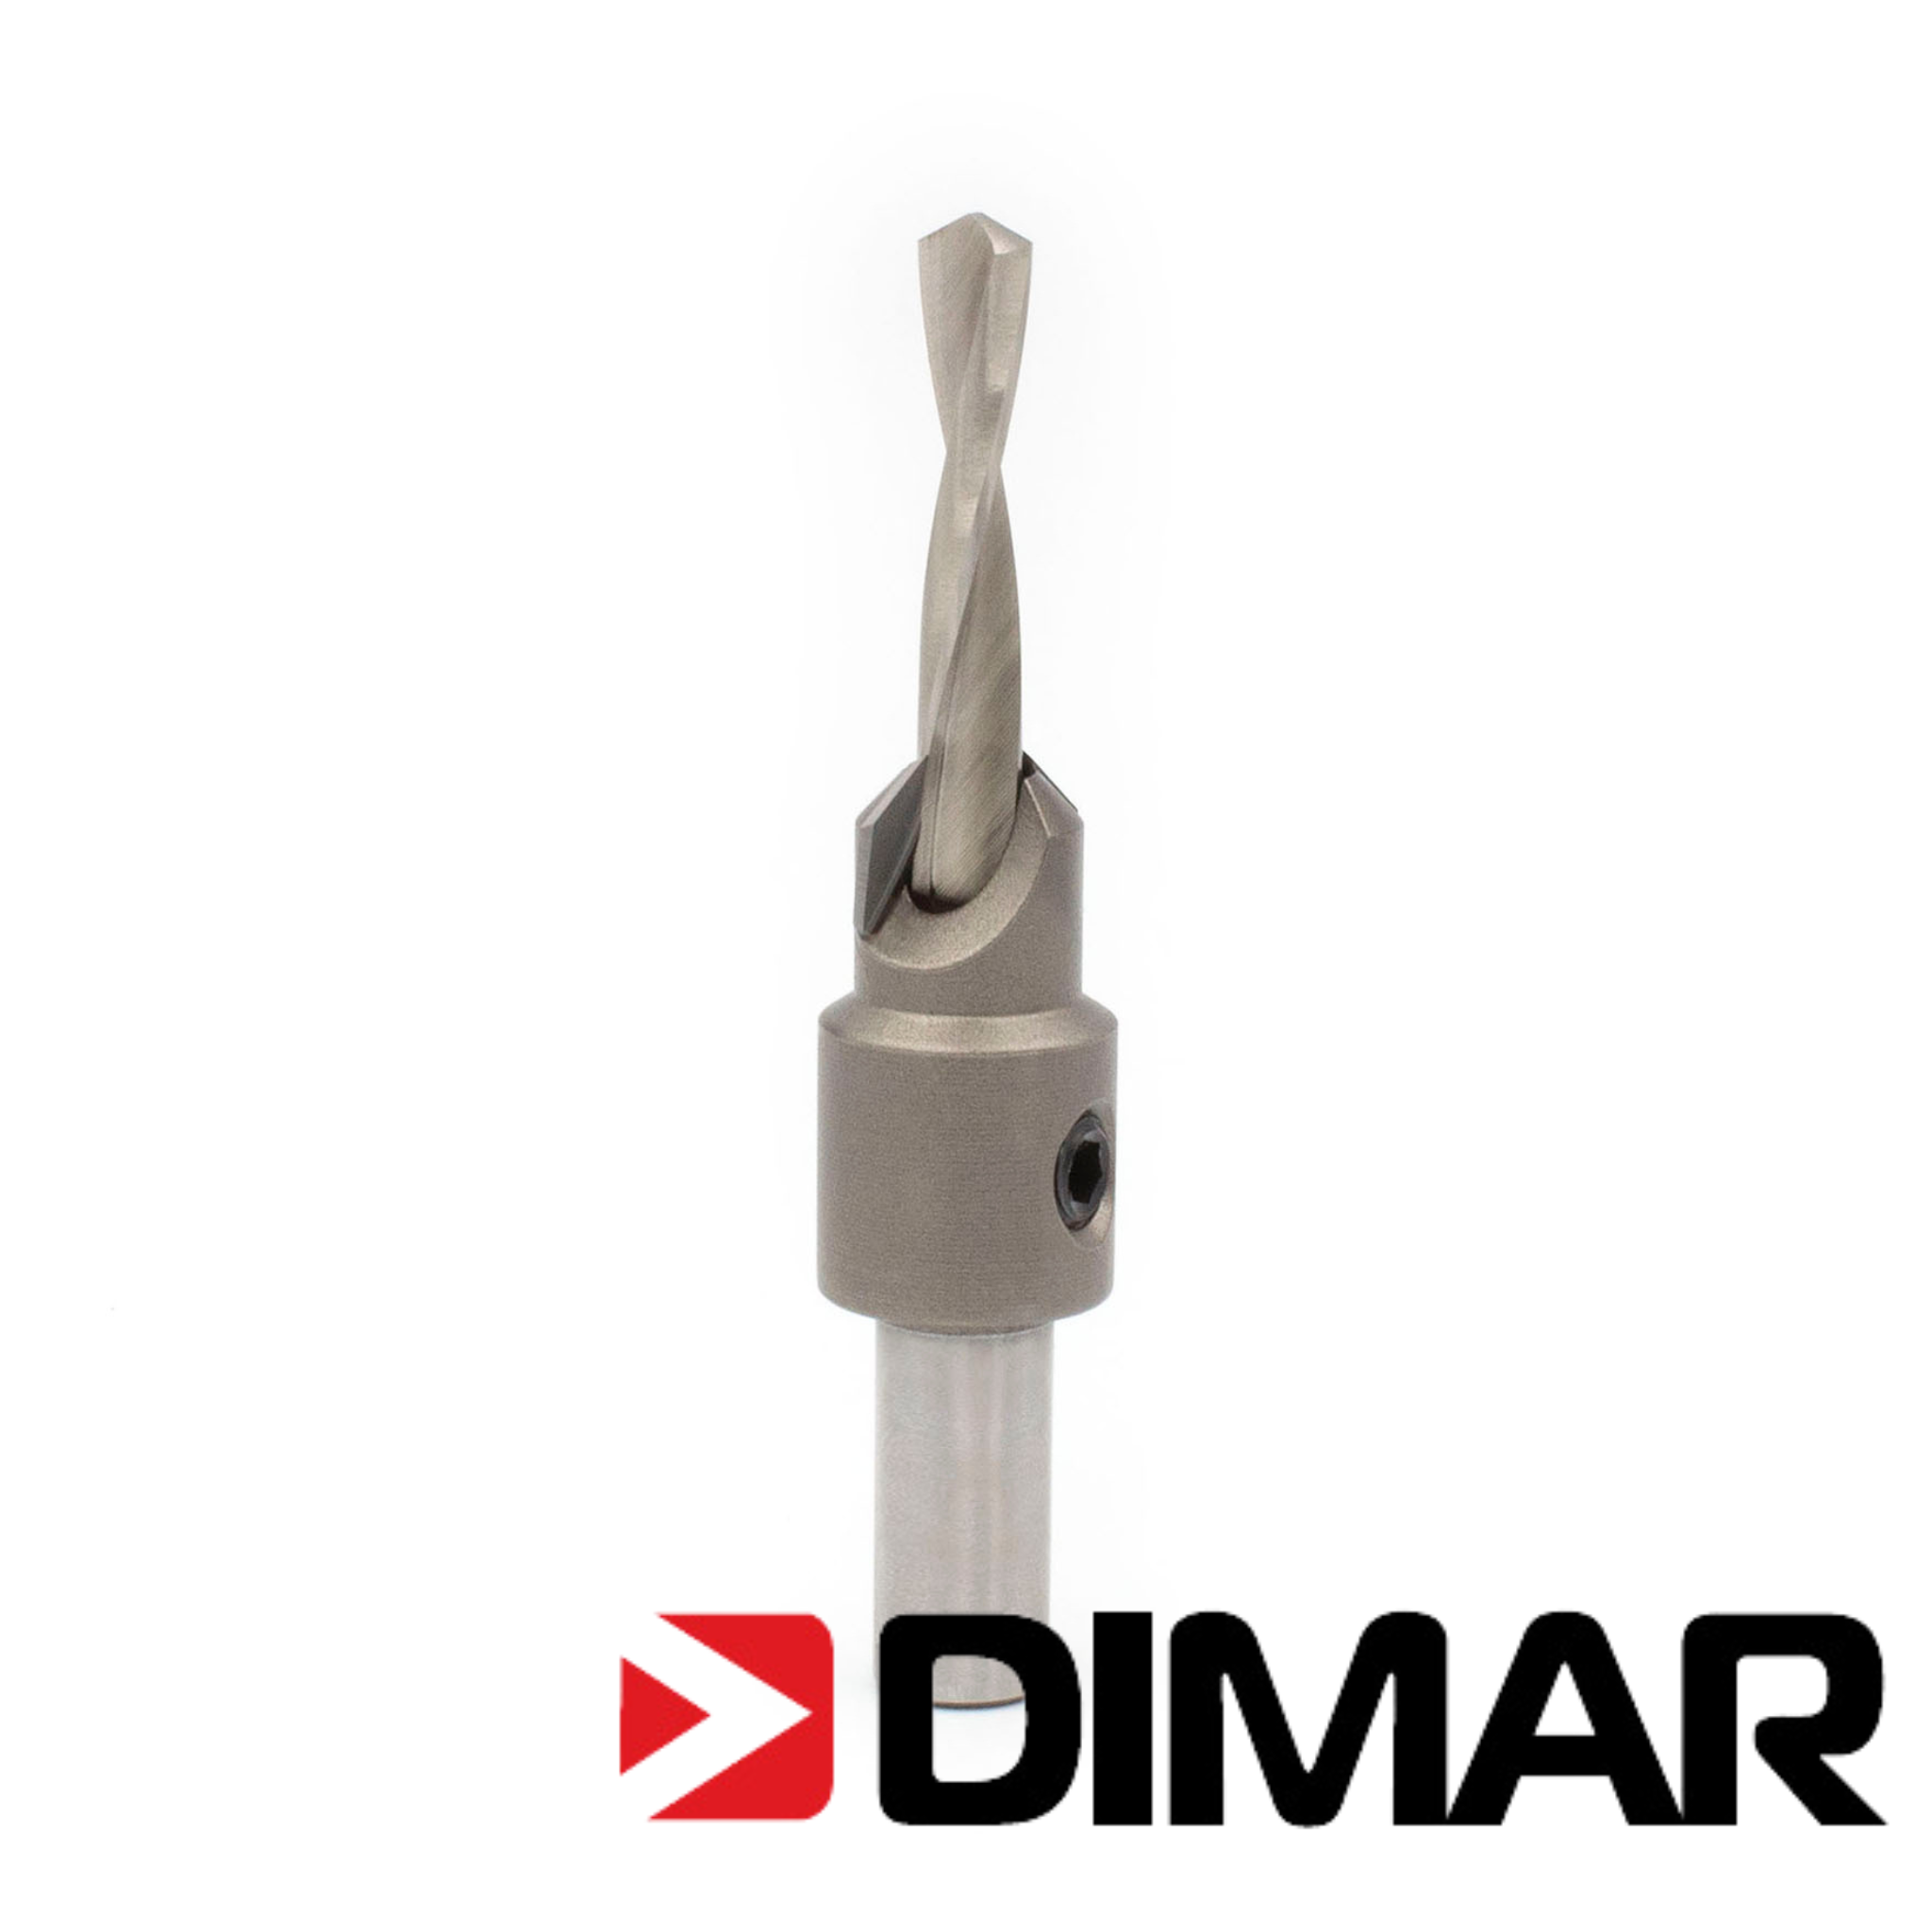 Dimar - 200-CT Countersink with Spiral Drill Carbide | Product